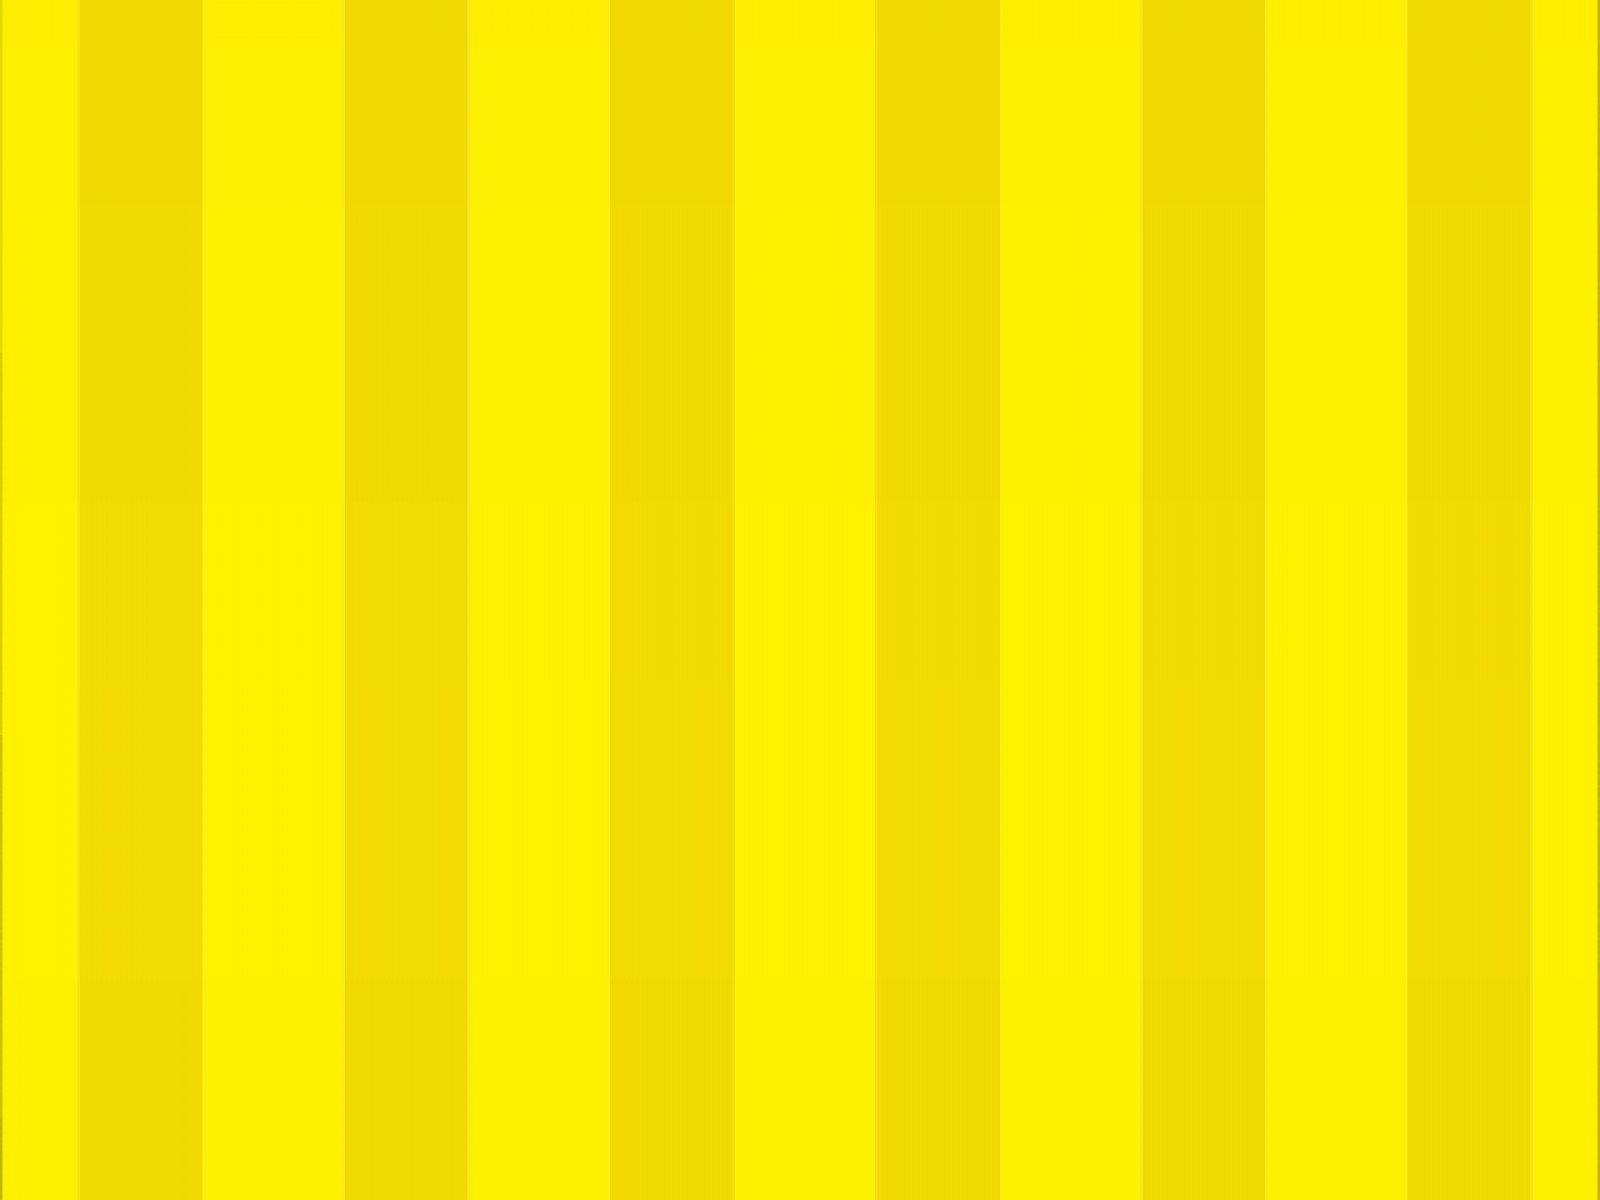 The Yellow Wallpaper Full Text Background For A